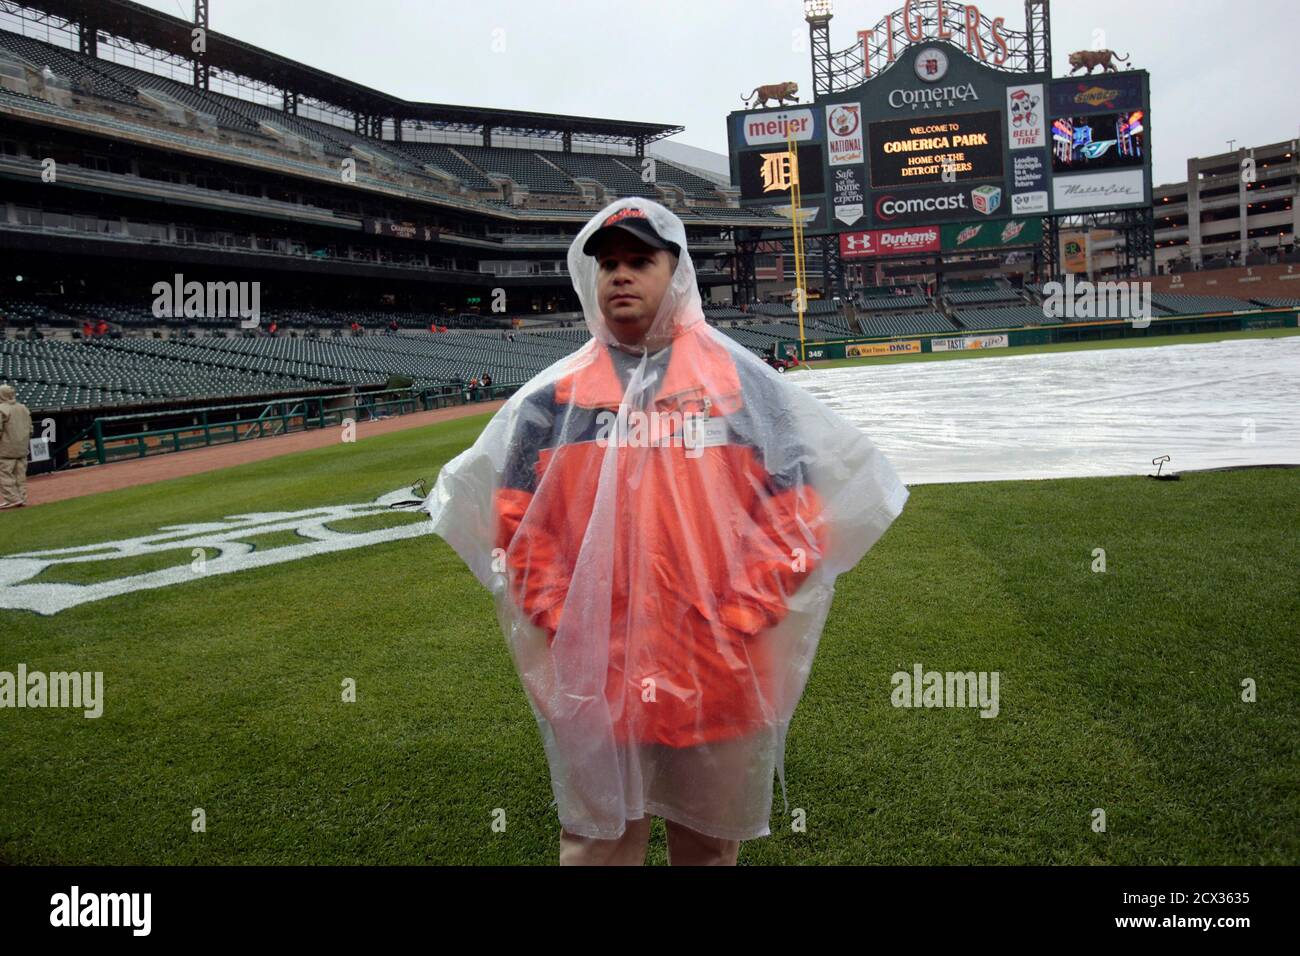 A Detroit Tigers field crew member stands on the field in the rain before the start of their MLB American League baseball game against the Toronto Blue Jays in Detroit, Michigan May 17, 2011. REUTERS/Rebecca Cook  (UNITED STATES - Tags: SPORT BASEBALL) Stock Photo